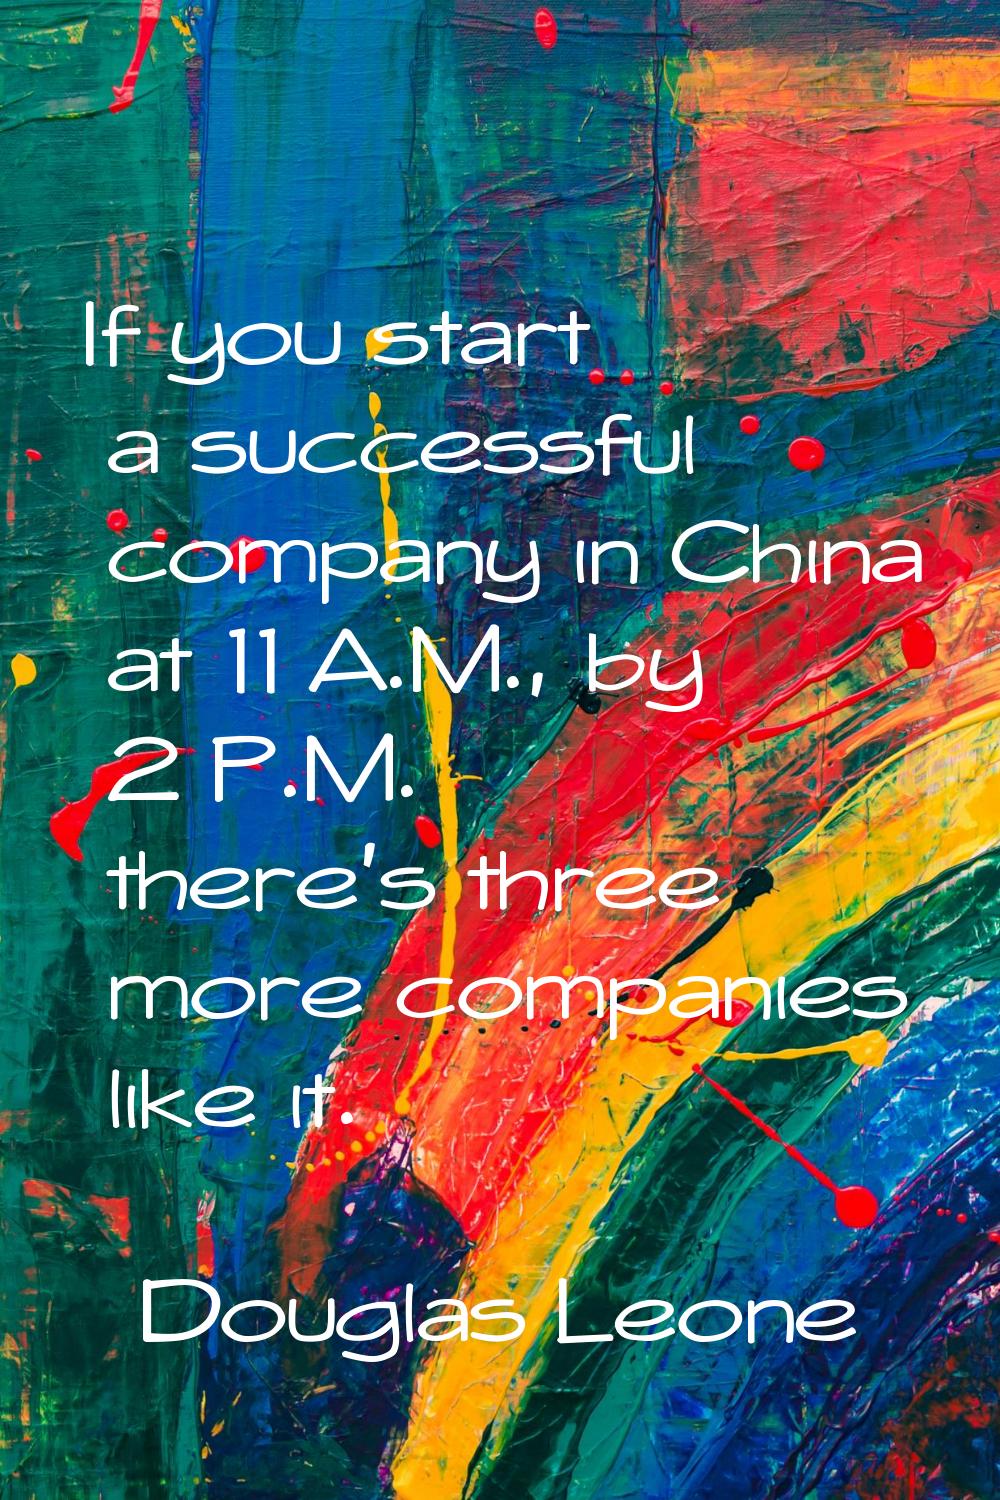 If you start a successful company in China at 11 A.M., by 2 P.M. there's three more companies like 